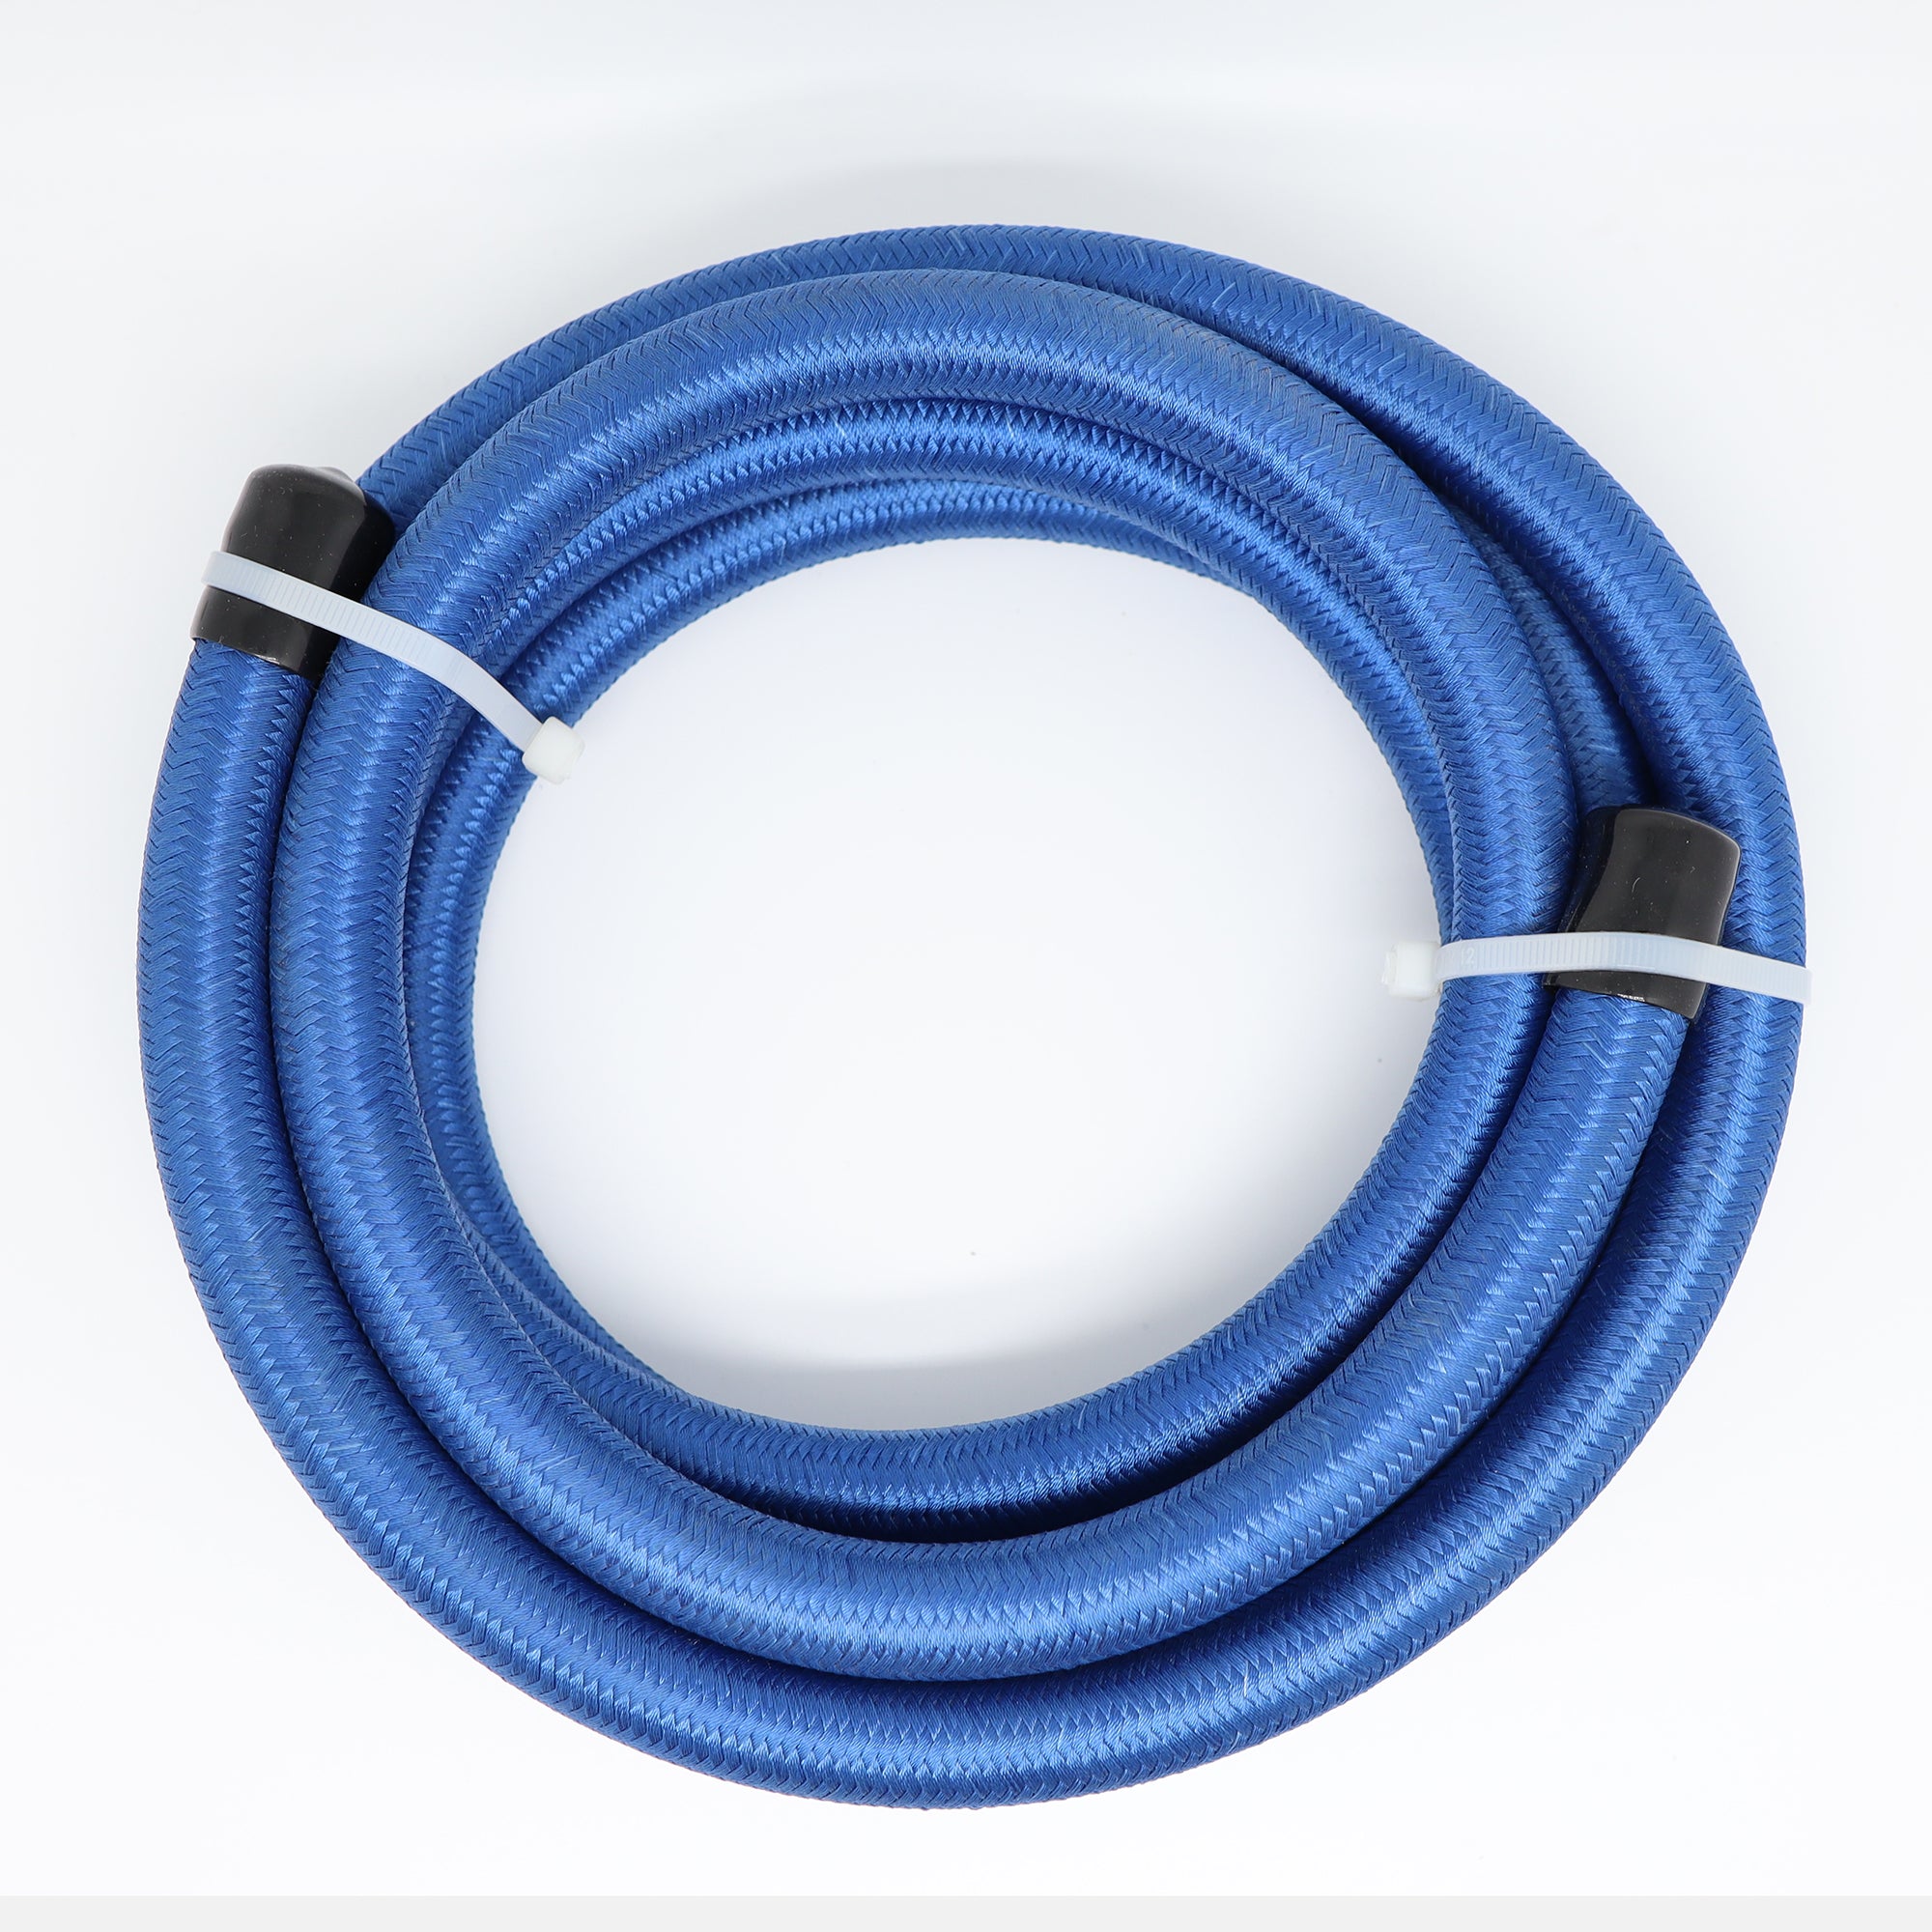 5/16 8mm Nylon Stainless Steel Braided PTFE Fuel Hose Blue 1ft